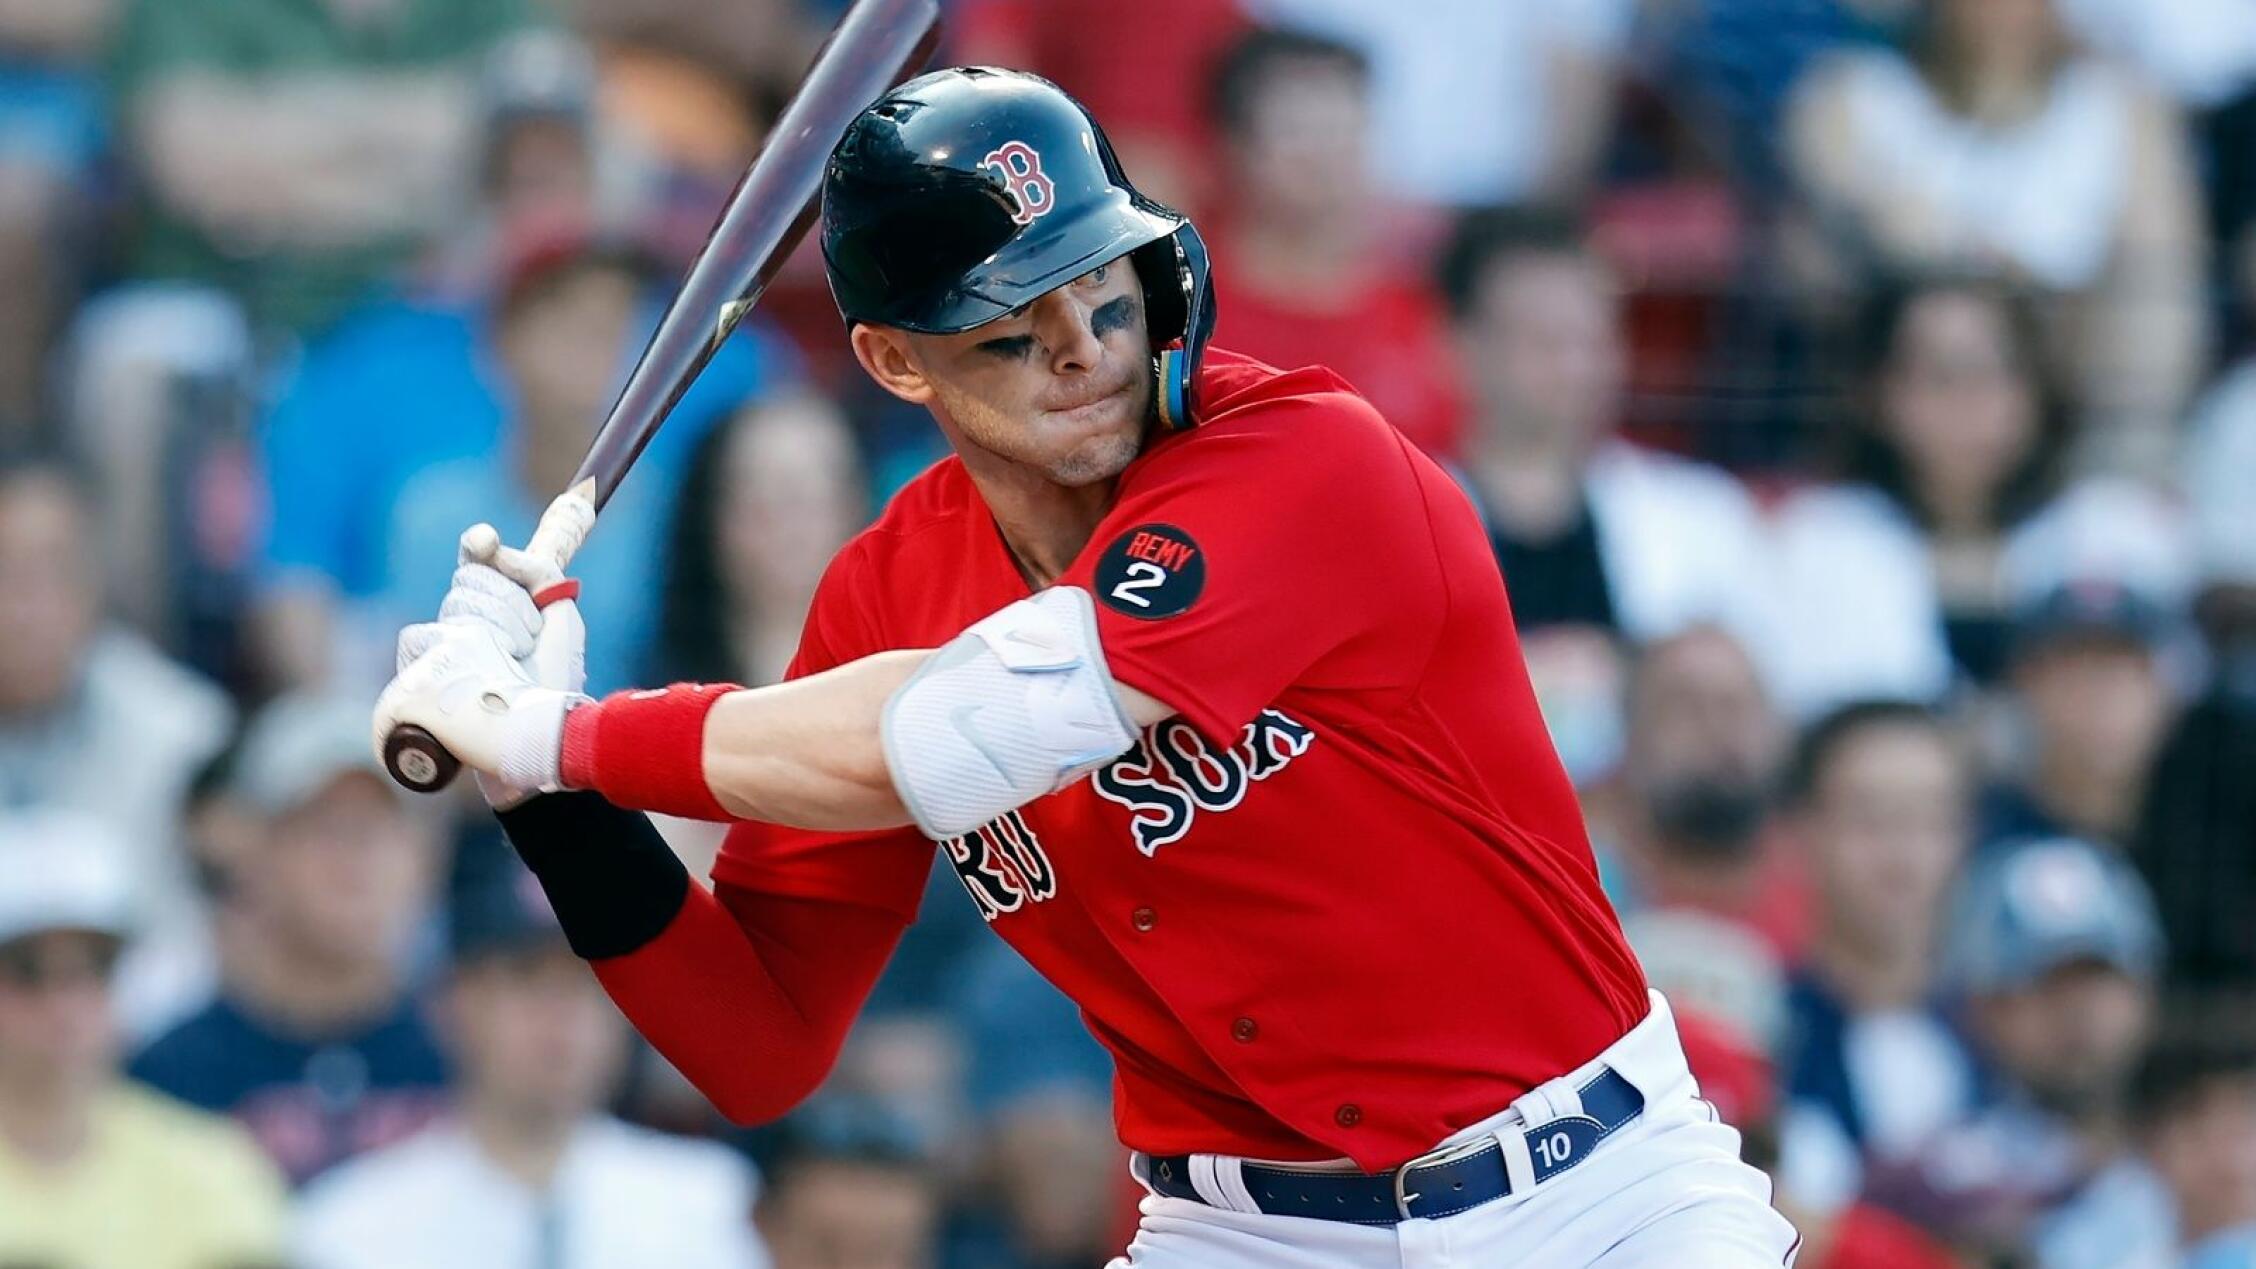 Trevor Story calls Red Sox tenure frustrating, but he's eager to